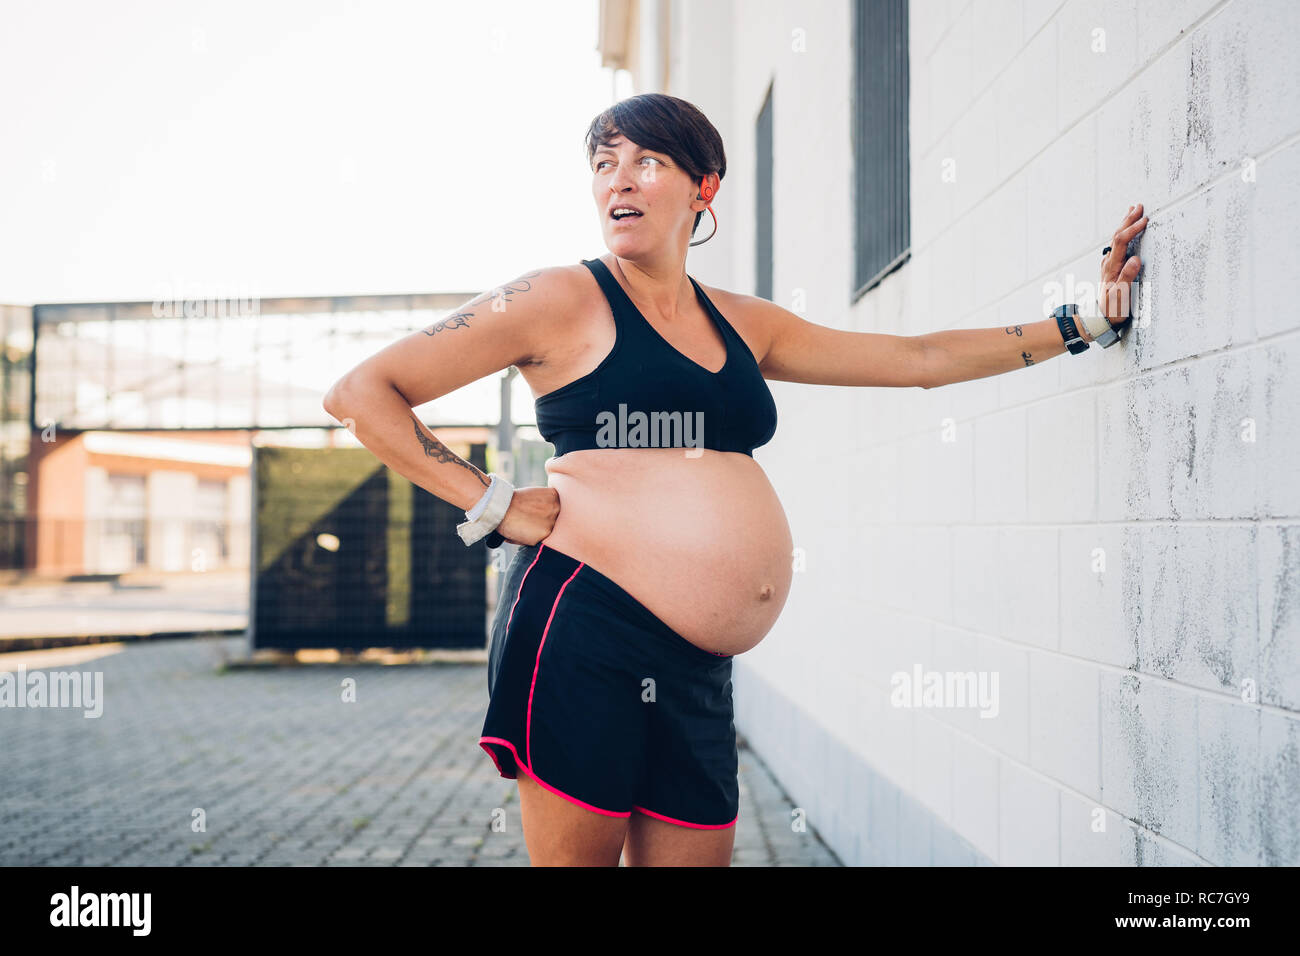 Pregnant woman taking break from workout Stock Photo